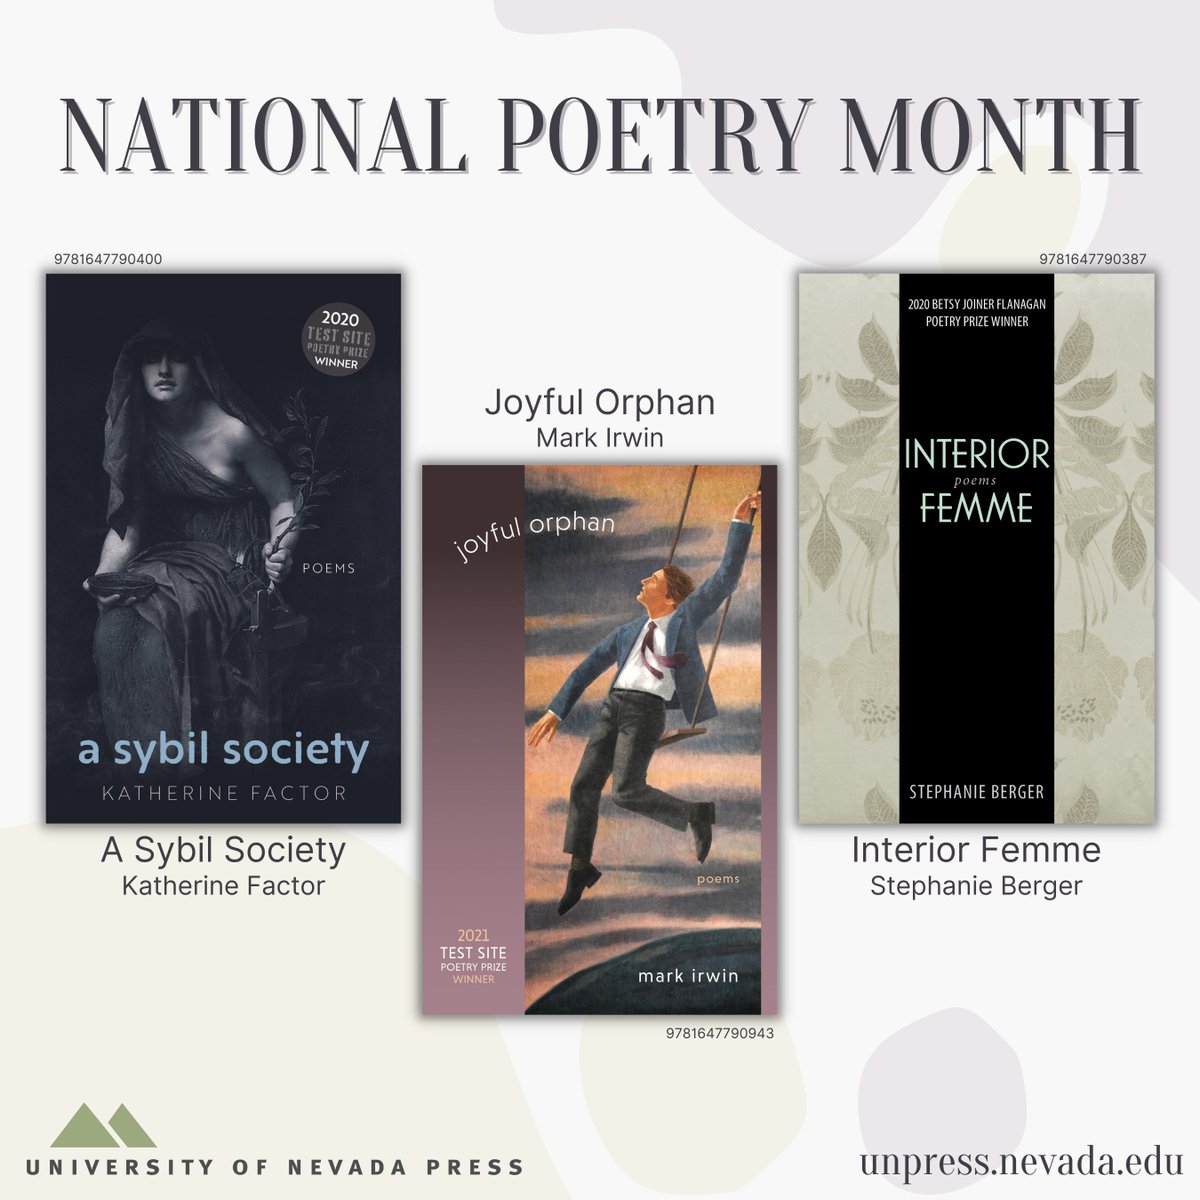 Happy National Poetry Month! Check out some of our recommendations: 𝘼 𝙎𝙮𝙗𝙞𝙡 𝙎𝙤𝙘𝙞𝙚𝙩𝙮 by Katherine Factor, 𝙅𝙤𝙮𝙛𝙪𝙡 𝙊𝙧𝙥𝙝𝙖𝙣 by Mark Irwin, and 𝙄𝙣𝙩𝙚𝙧𝙞𝙤𝙧 𝙁𝙚𝙢𝙢𝙚 by Stephanie Berger. #UniversityOfNevadaReno #NationalPoetryMonth #BookX